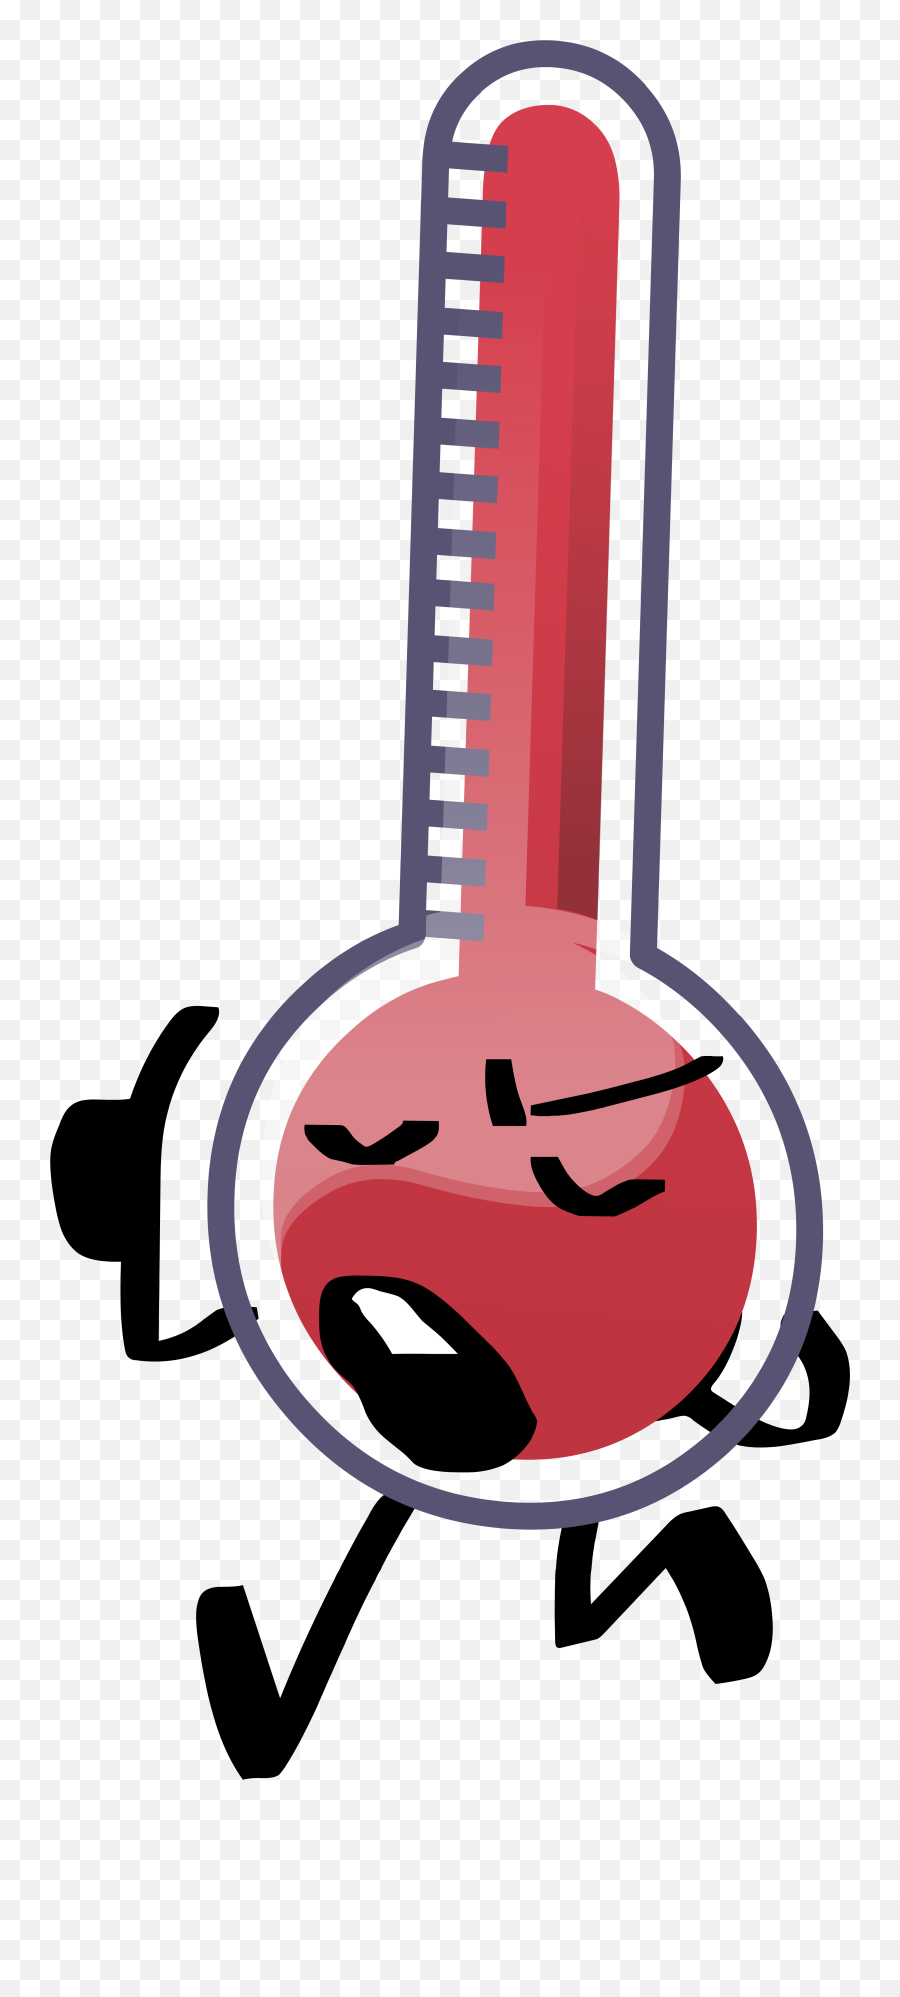 Thermometer - Measuring Instrument Emoji,Emotions Thermometer